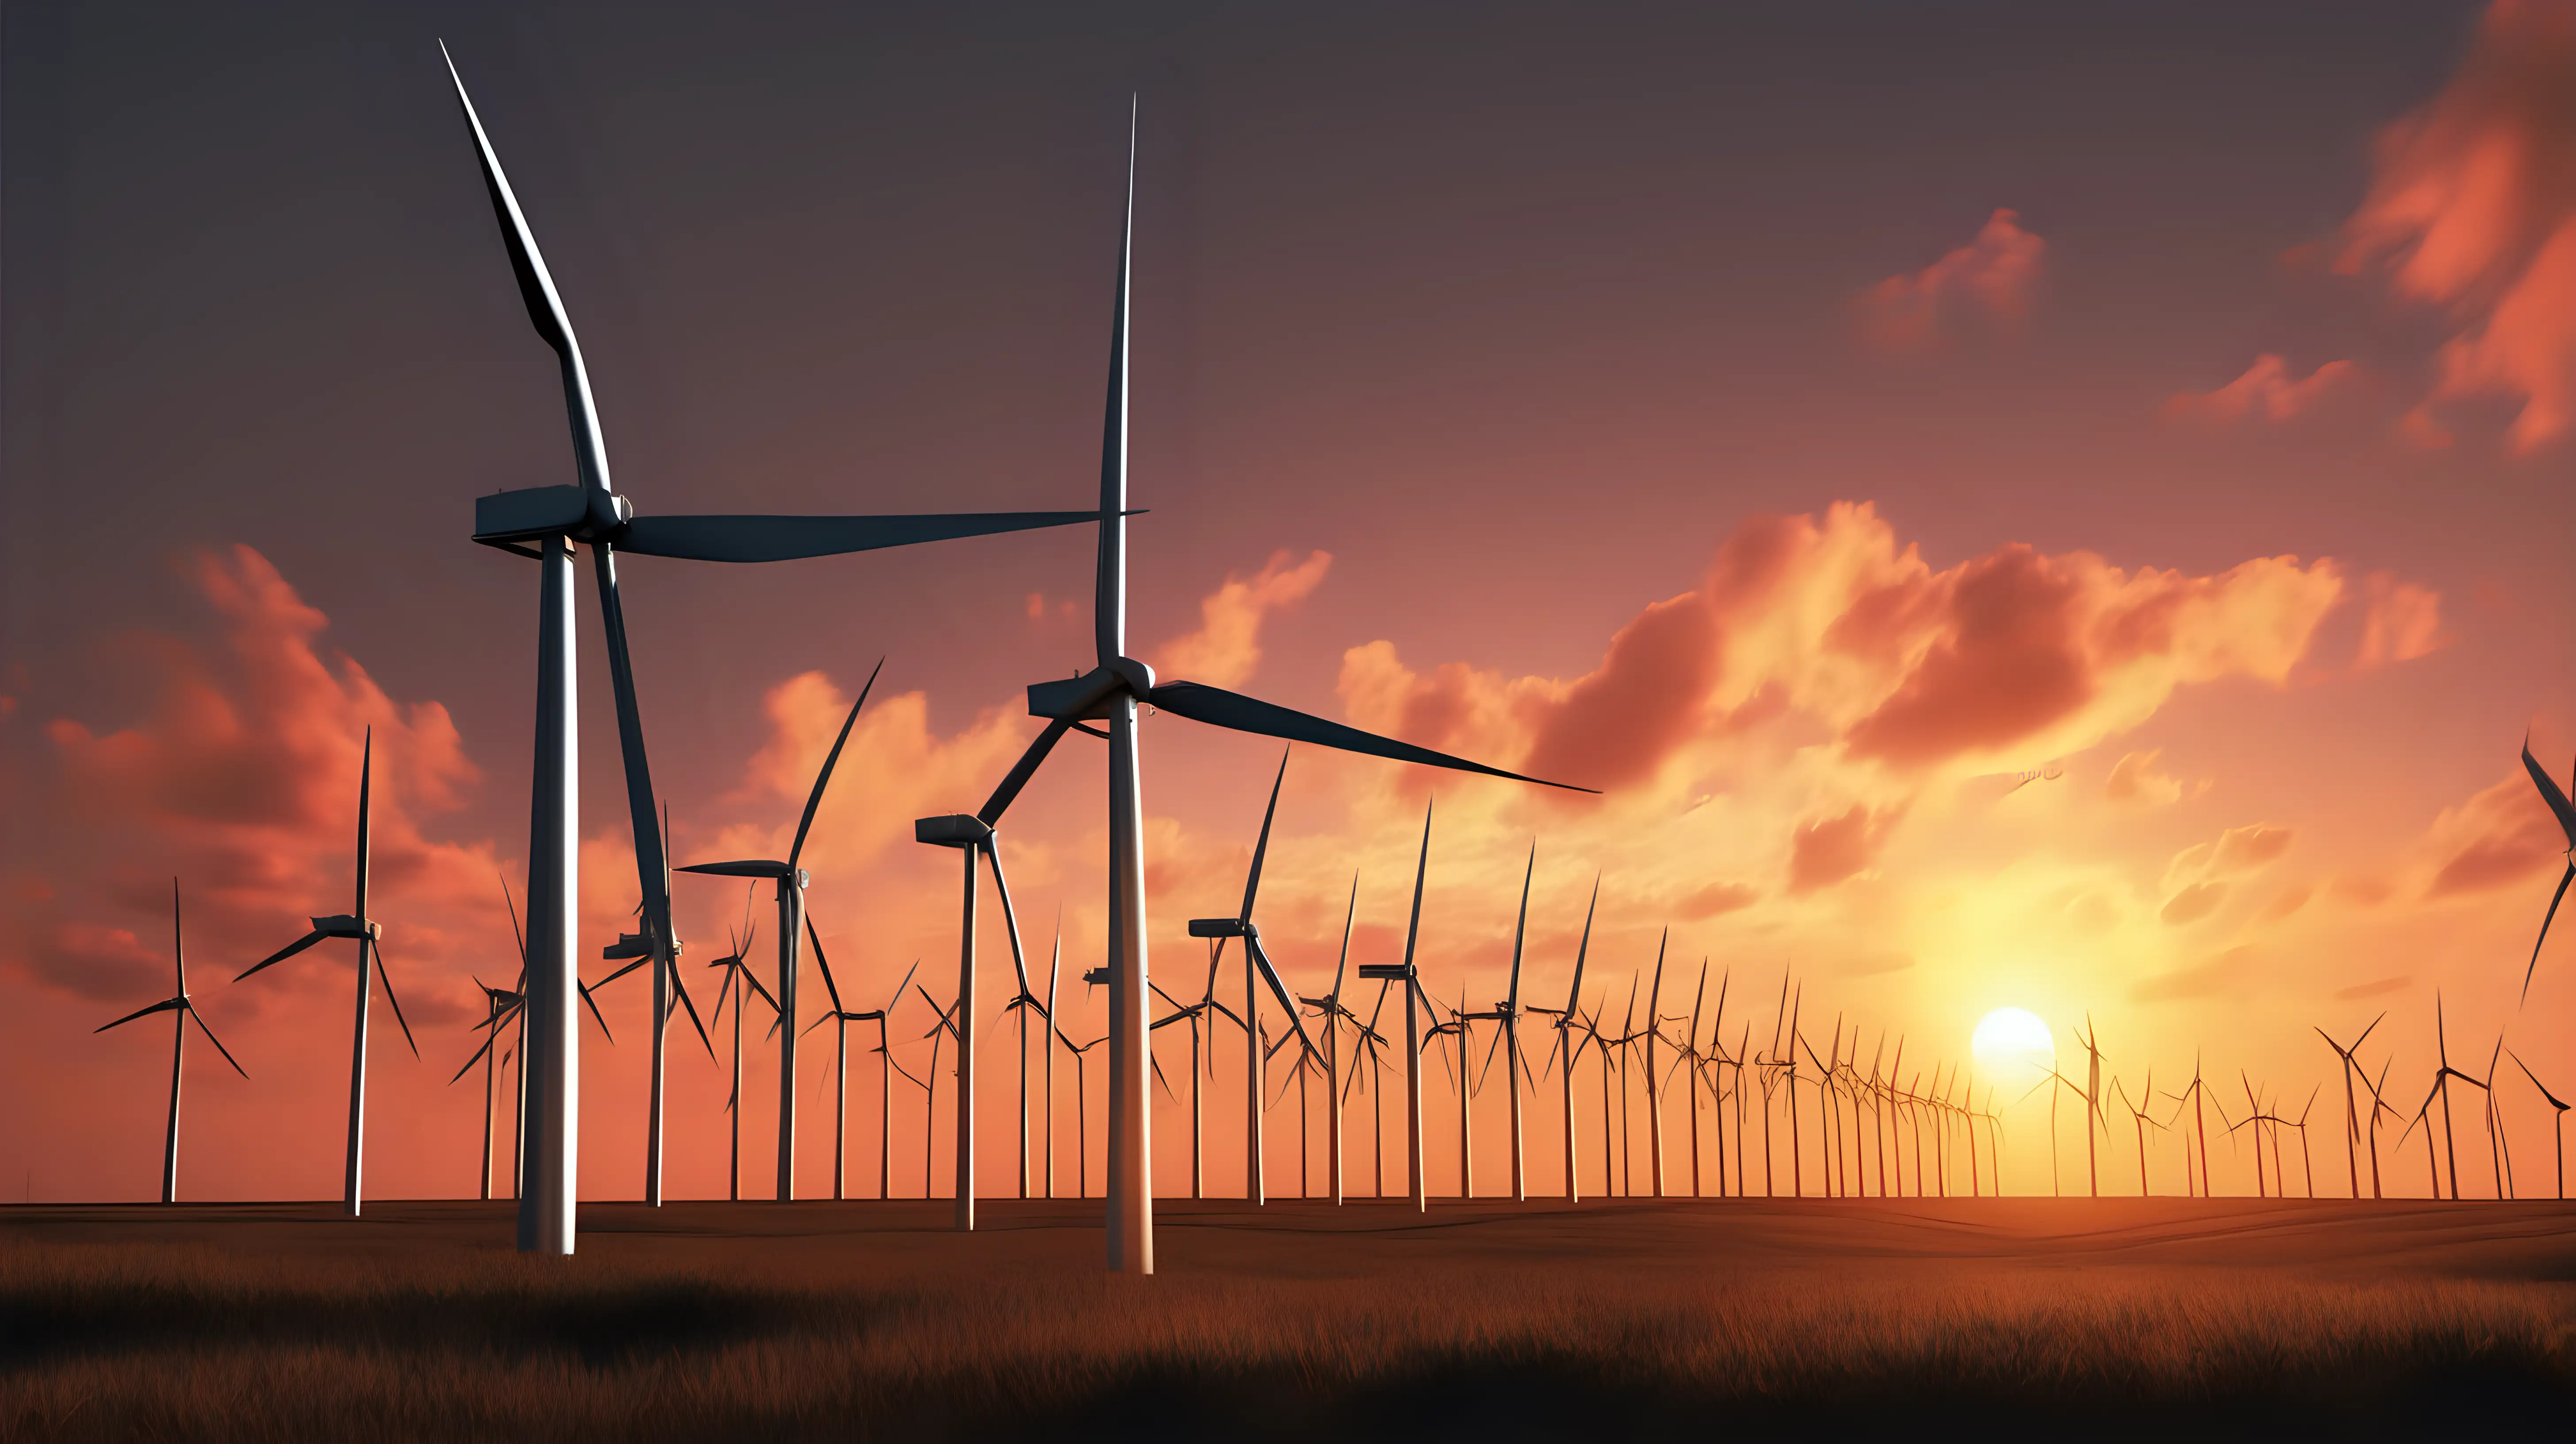 "Generate a visual representation of a wind farm at sunset, with wind turbines gracefully turning against a vibrant sky."